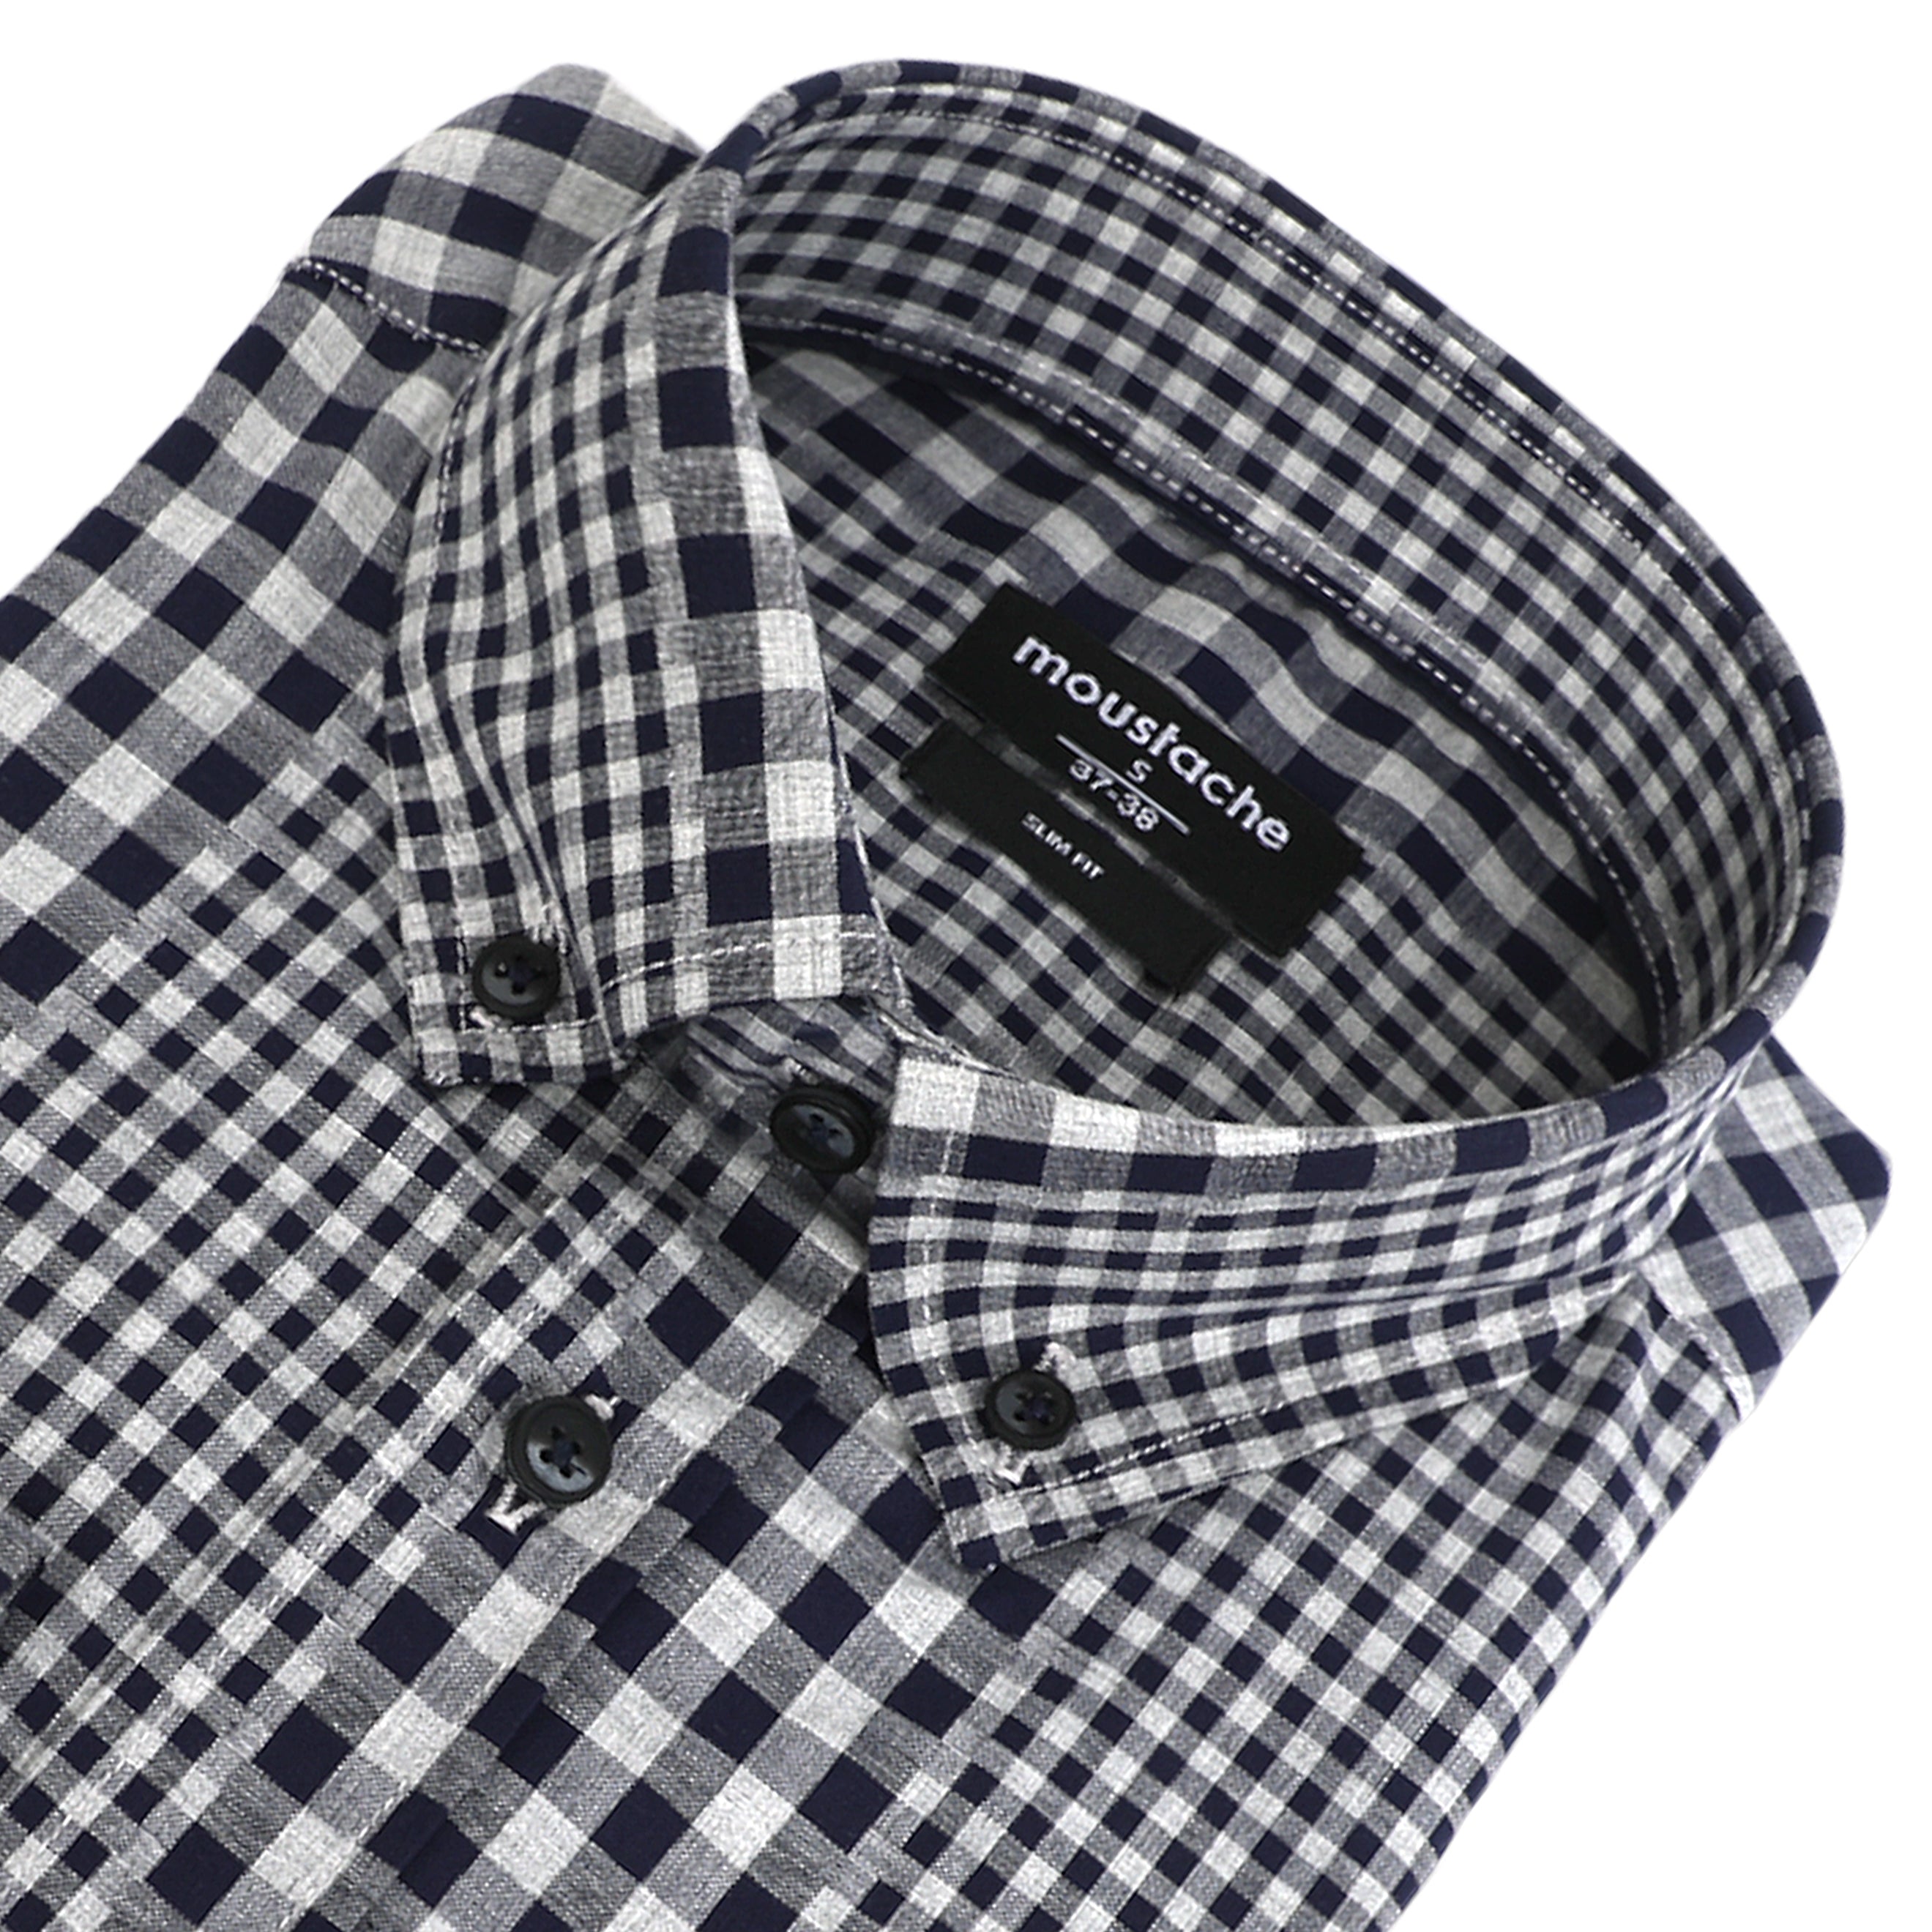 Moustache's Slim Fit Dark Navy Patterned Casual Shirt